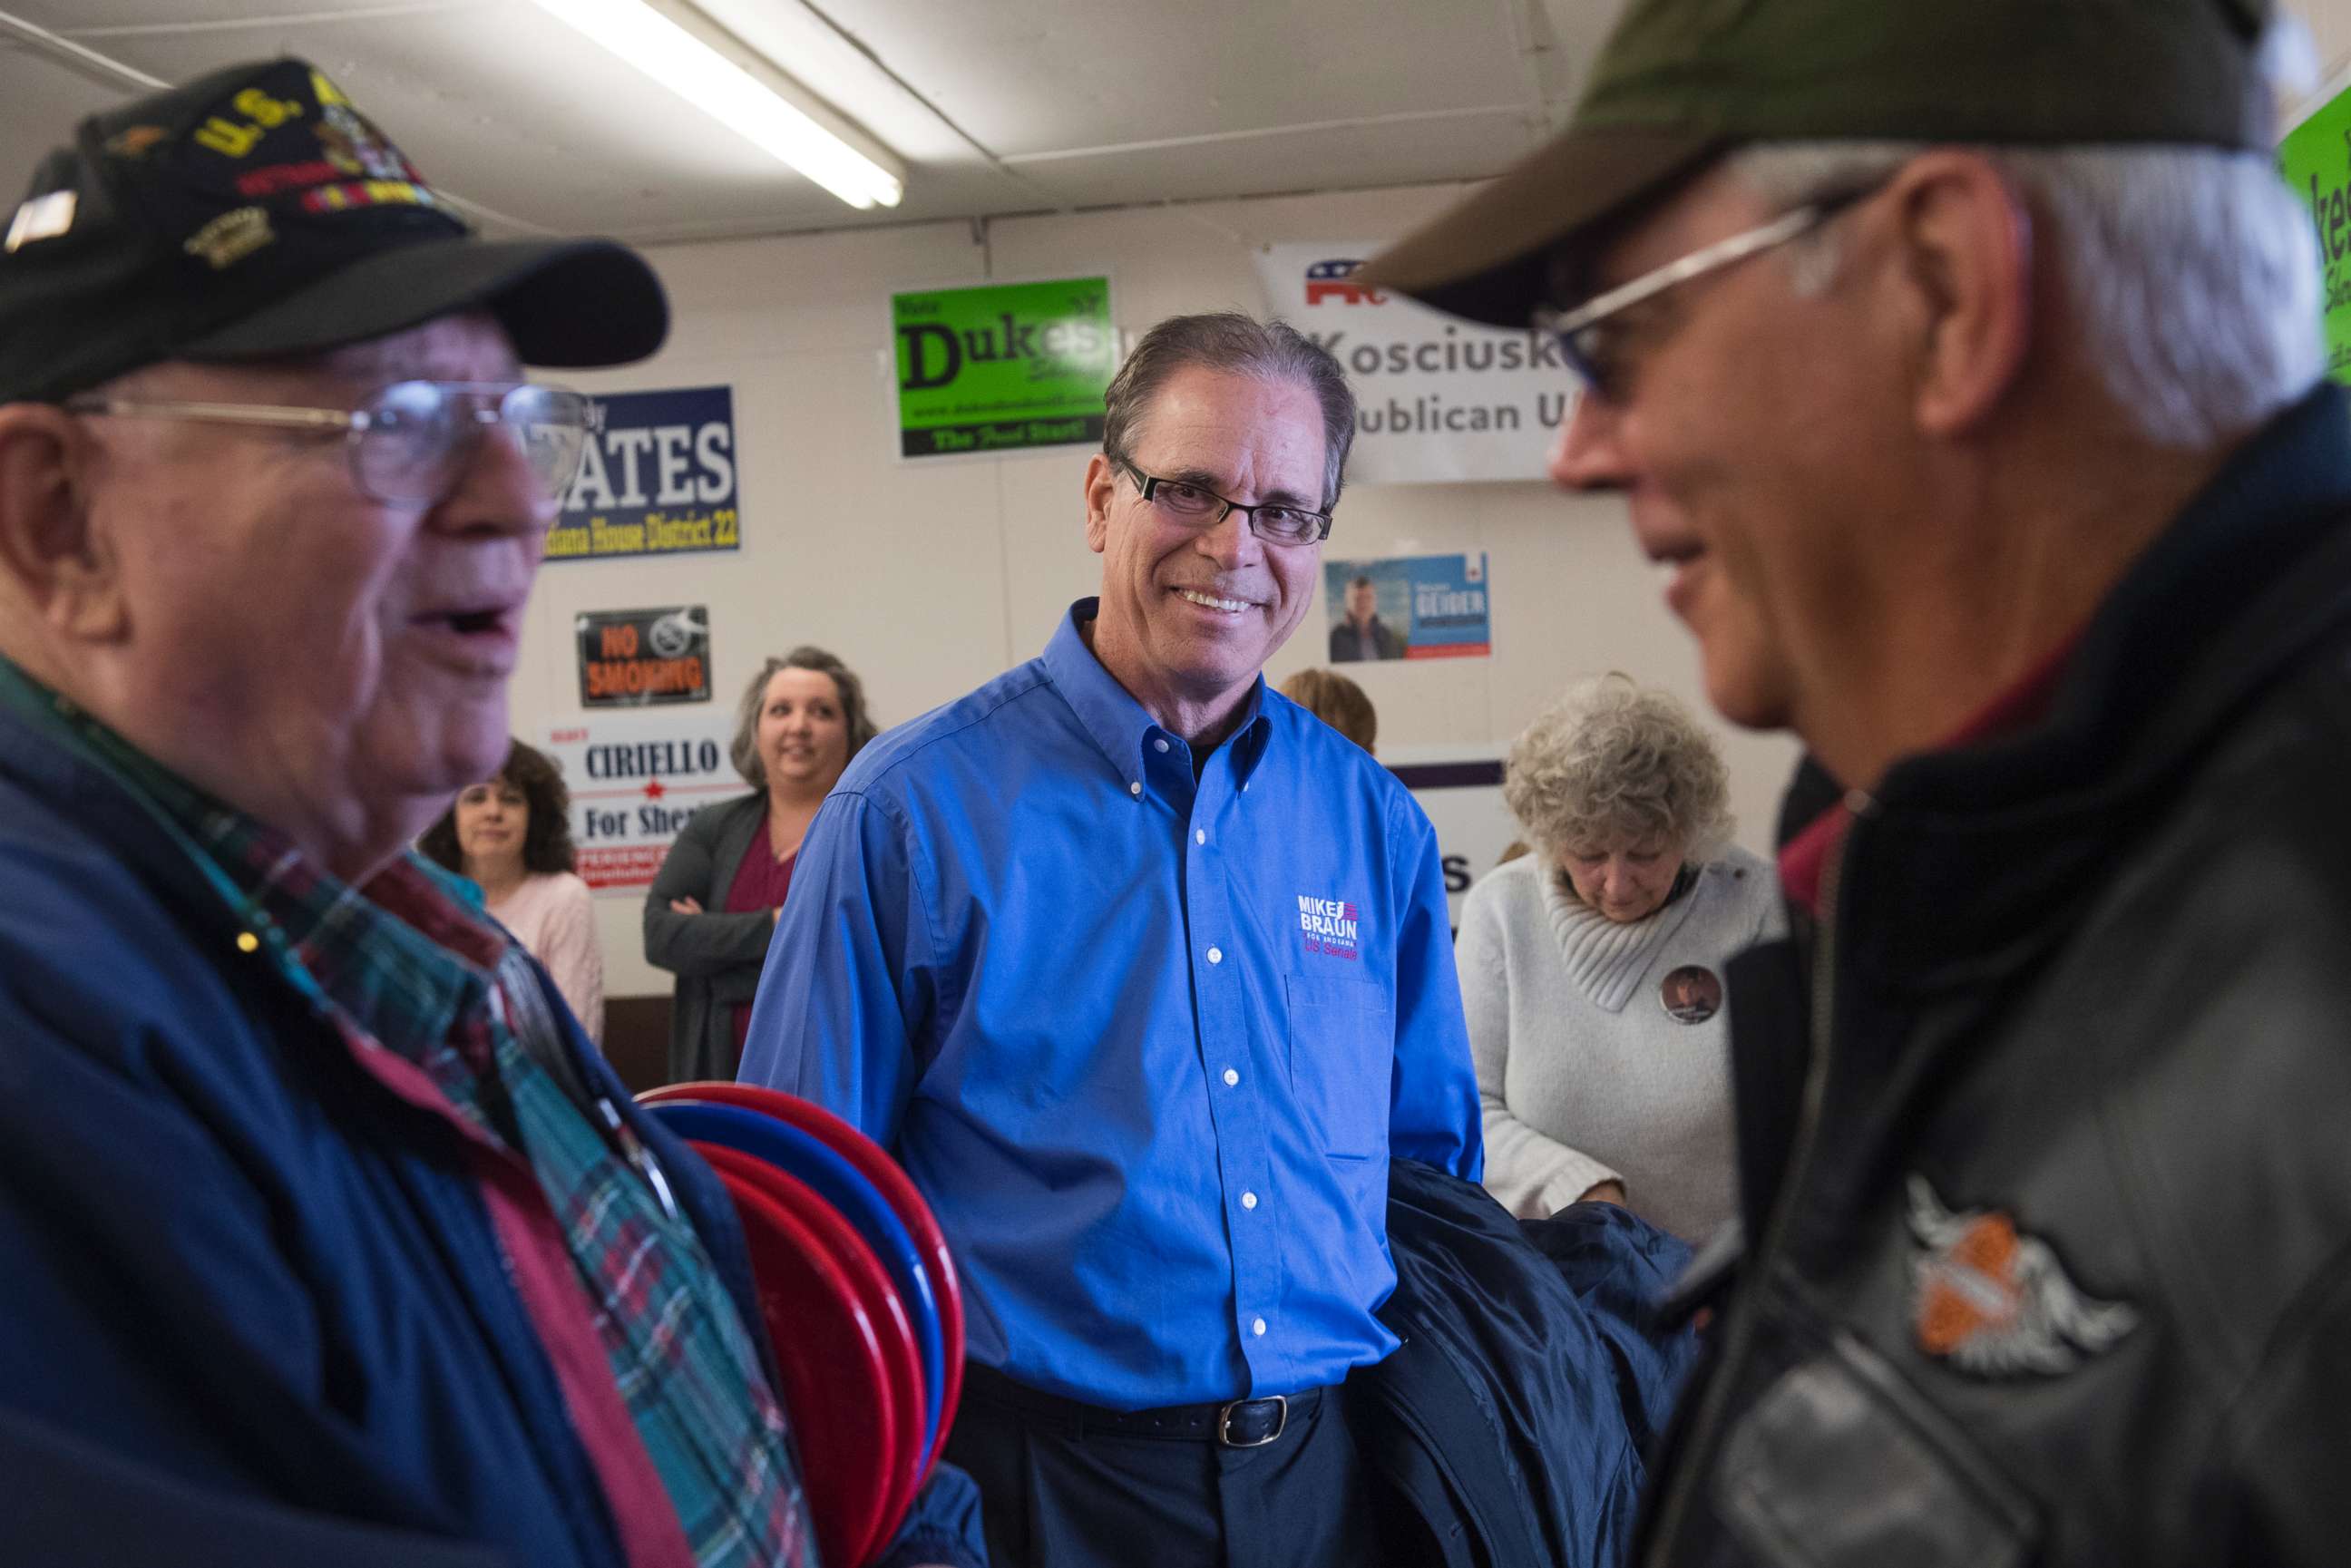 PHOTO: Mike Braun, center, candidate for the Republican nomination for Senate in Indiana, attends the Kosciusko County Republican Fish Fry in Warsaw, Ind., April 4, 2018.